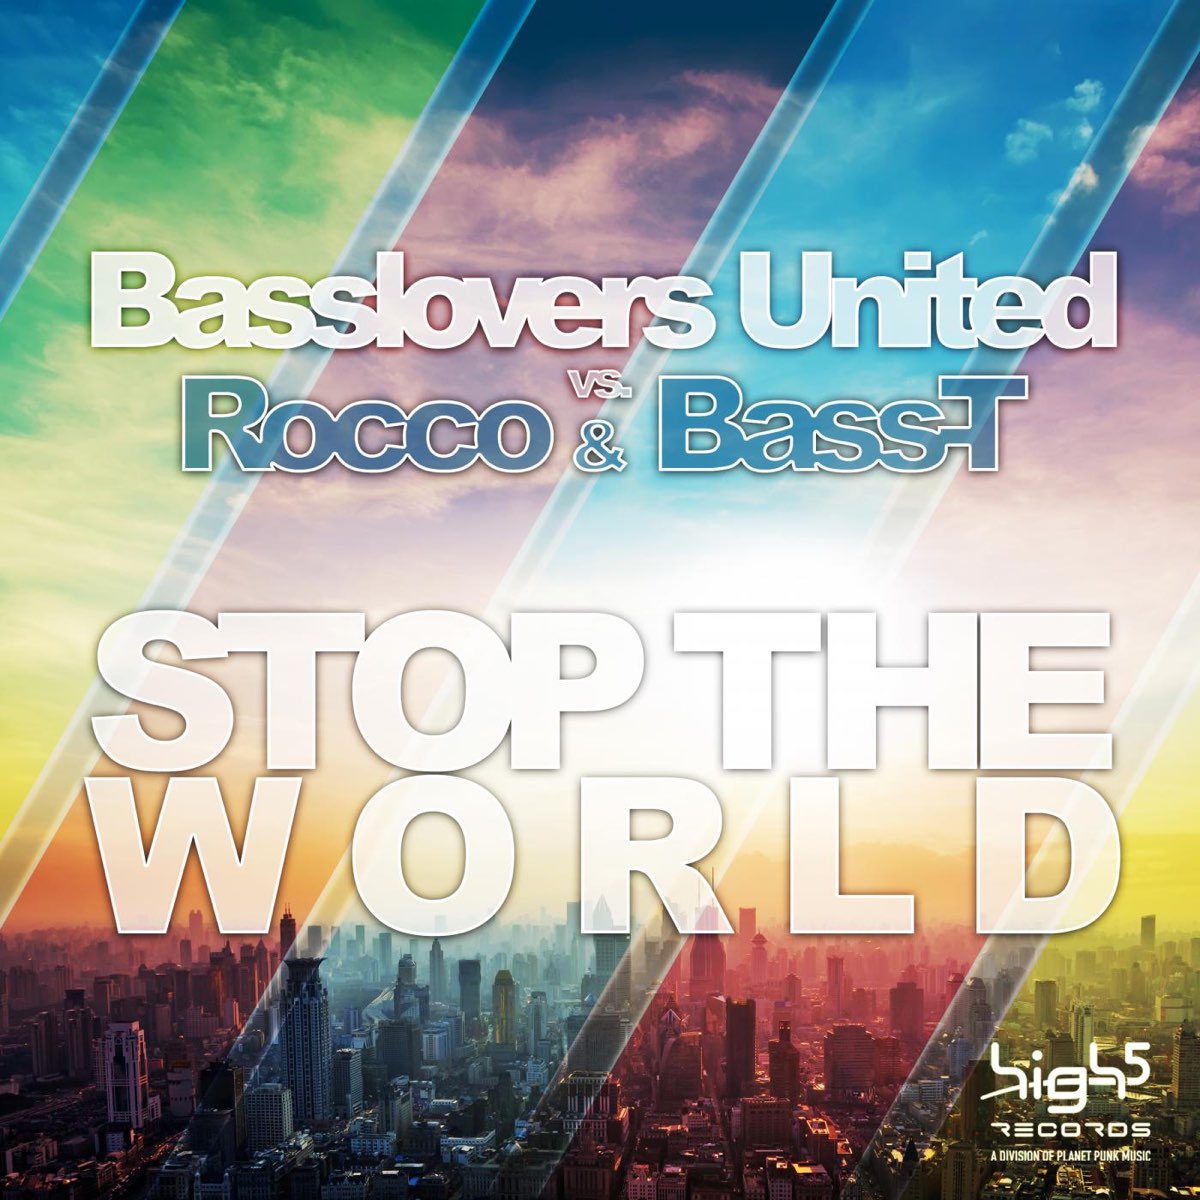 Rocco bass t. Basslovers United - feel it in my Soul.